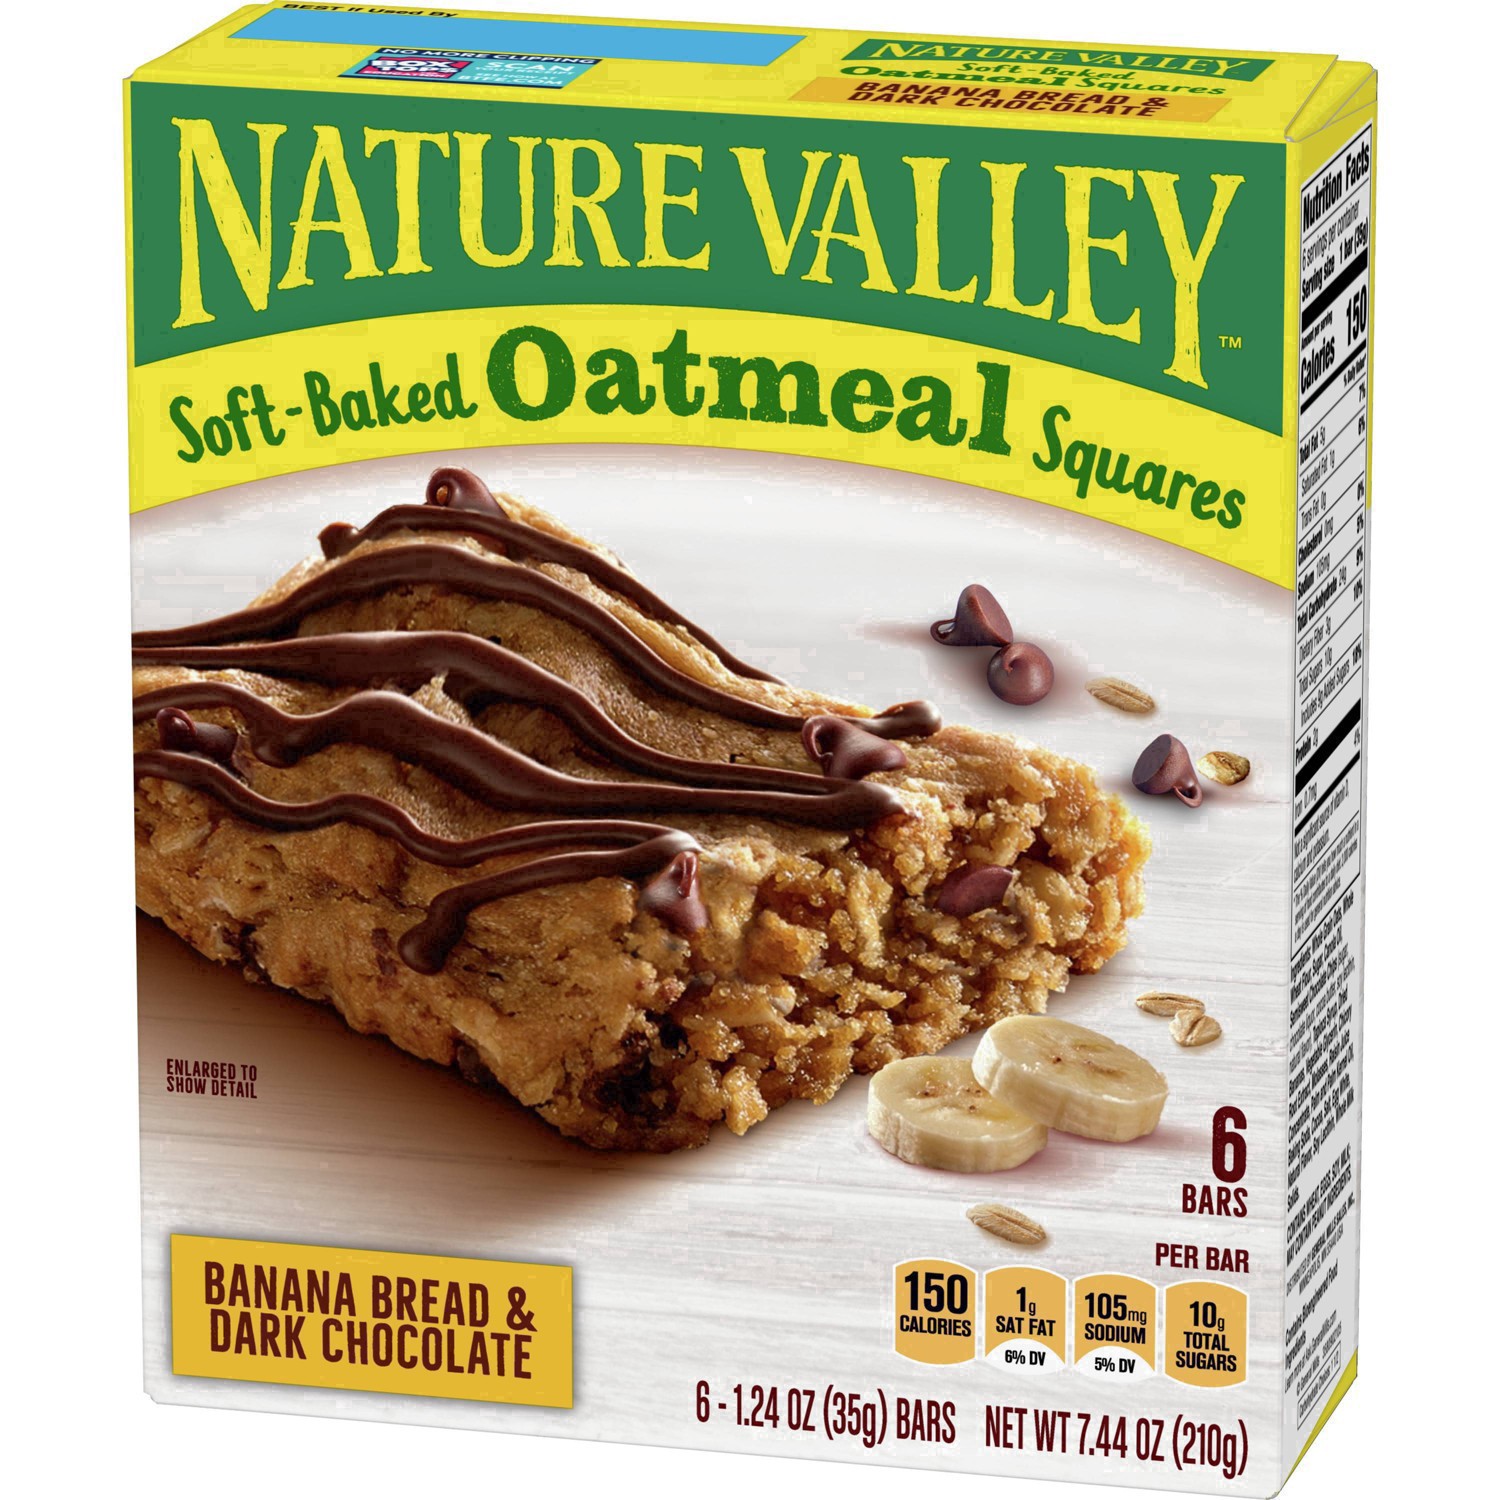 slide 36 of 101, Nature Valley Soft-Baked Oatmeal Squares, Banana Bread & Dark Chocolate, 6 ct, 6 ct